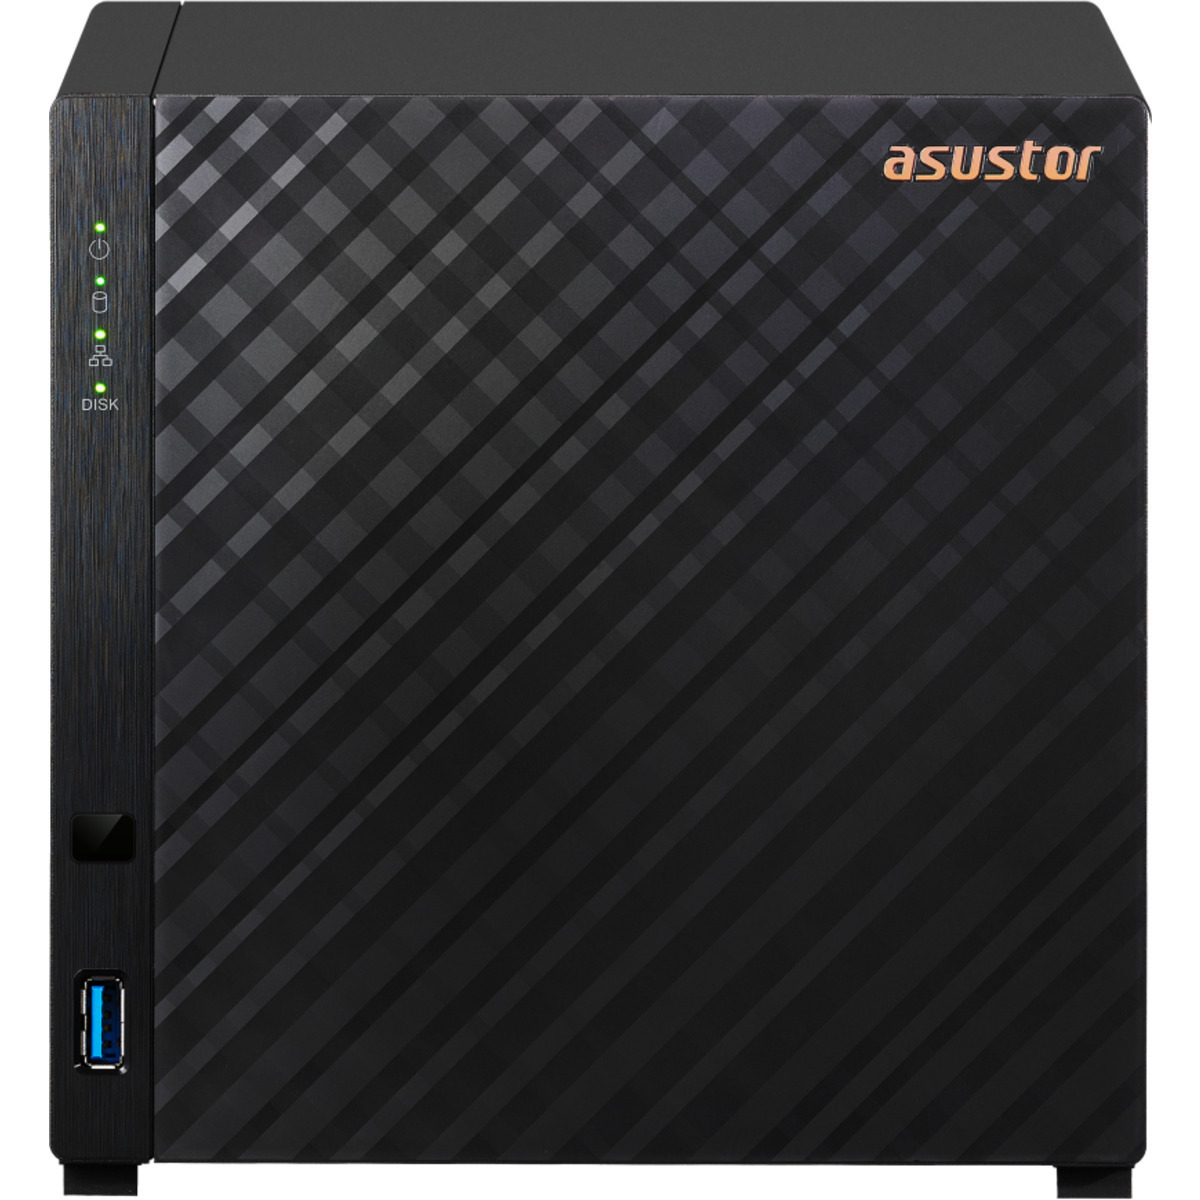 ASUSTOR DRIVESTOR 4 AS1104T 8tb 4-Bay Desktop Personal / Basic Home / Small Office NAS - Network Attached Storage Device 2x4tb Seagate EXOS 7E10 ST4000NM024B 3.5 7200rpm SATA 6Gb/s HDD ENTERPRISE Class Drives Installed - Burn-In Tested DRIVESTOR 4 AS1104T